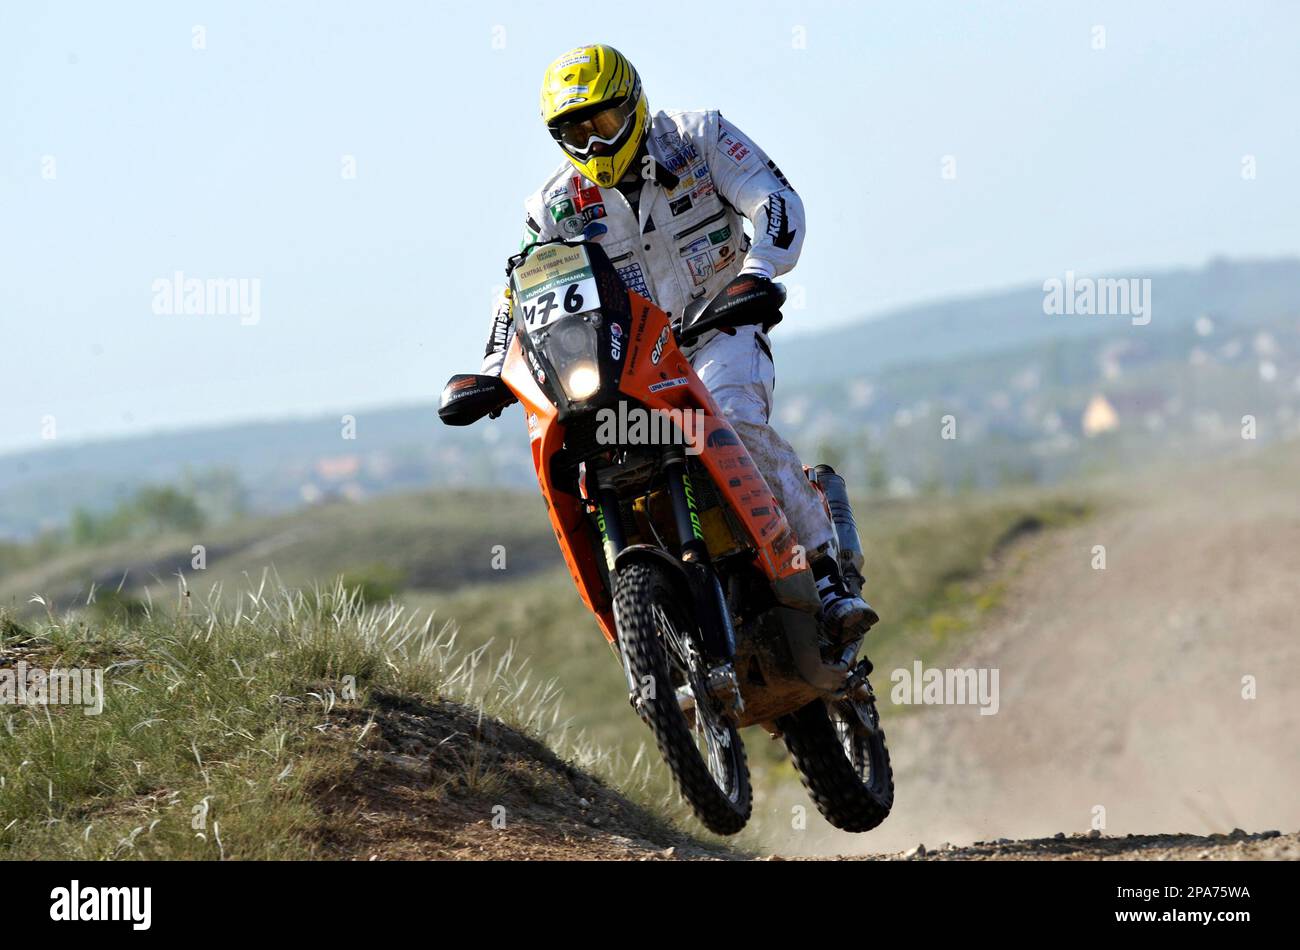 France's Frederic Lepan of the Aventure Moto Sport Team jumps with his bike  during the 6A special stage of the Central Europe Rally near Oeskue, 110 km  (68 miles) southwest of Budapest,